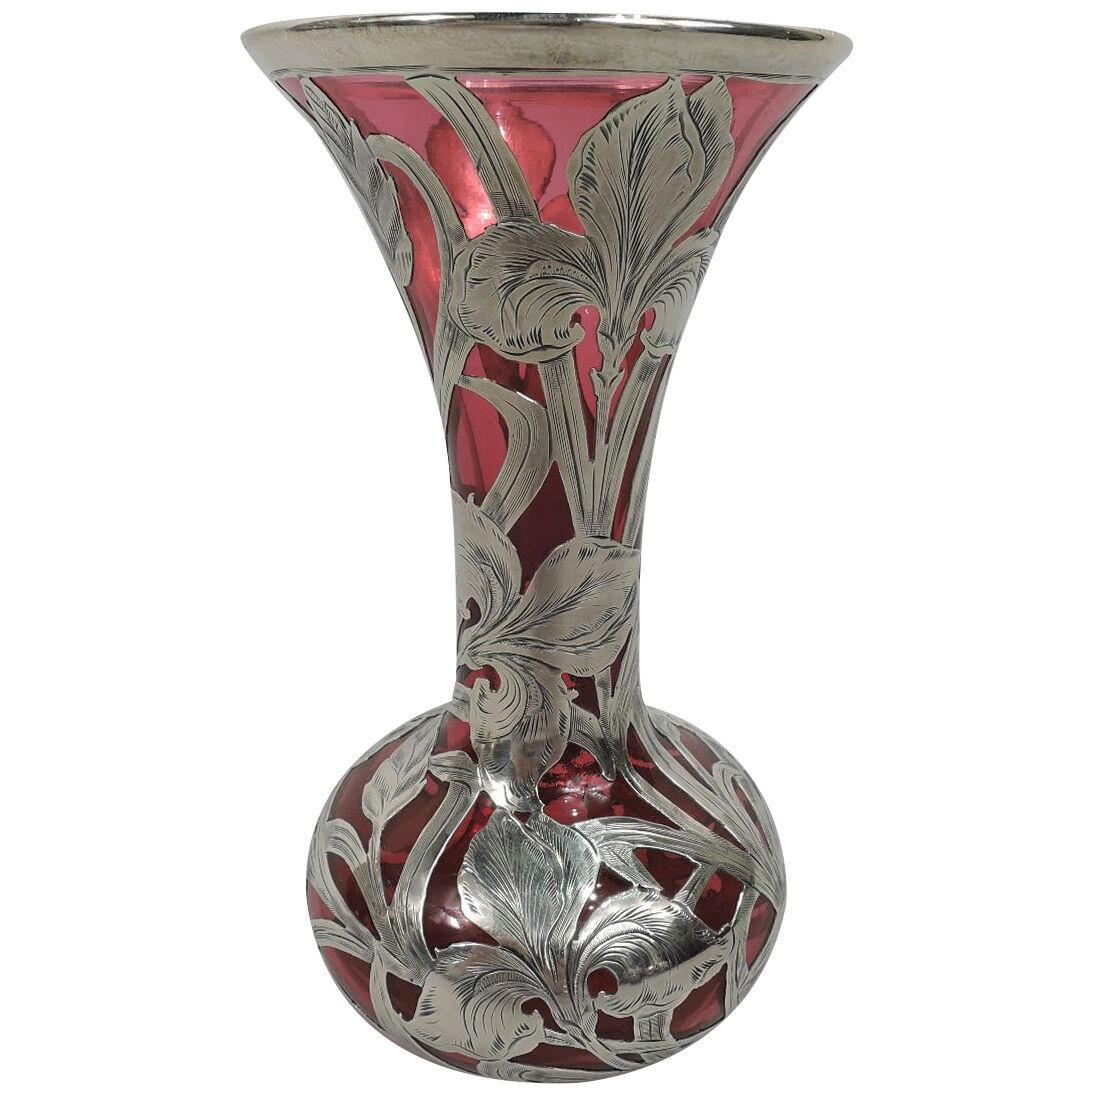 Antique Alvin Art Nouveau Red Silver Overlay Vase with Iris Flowers